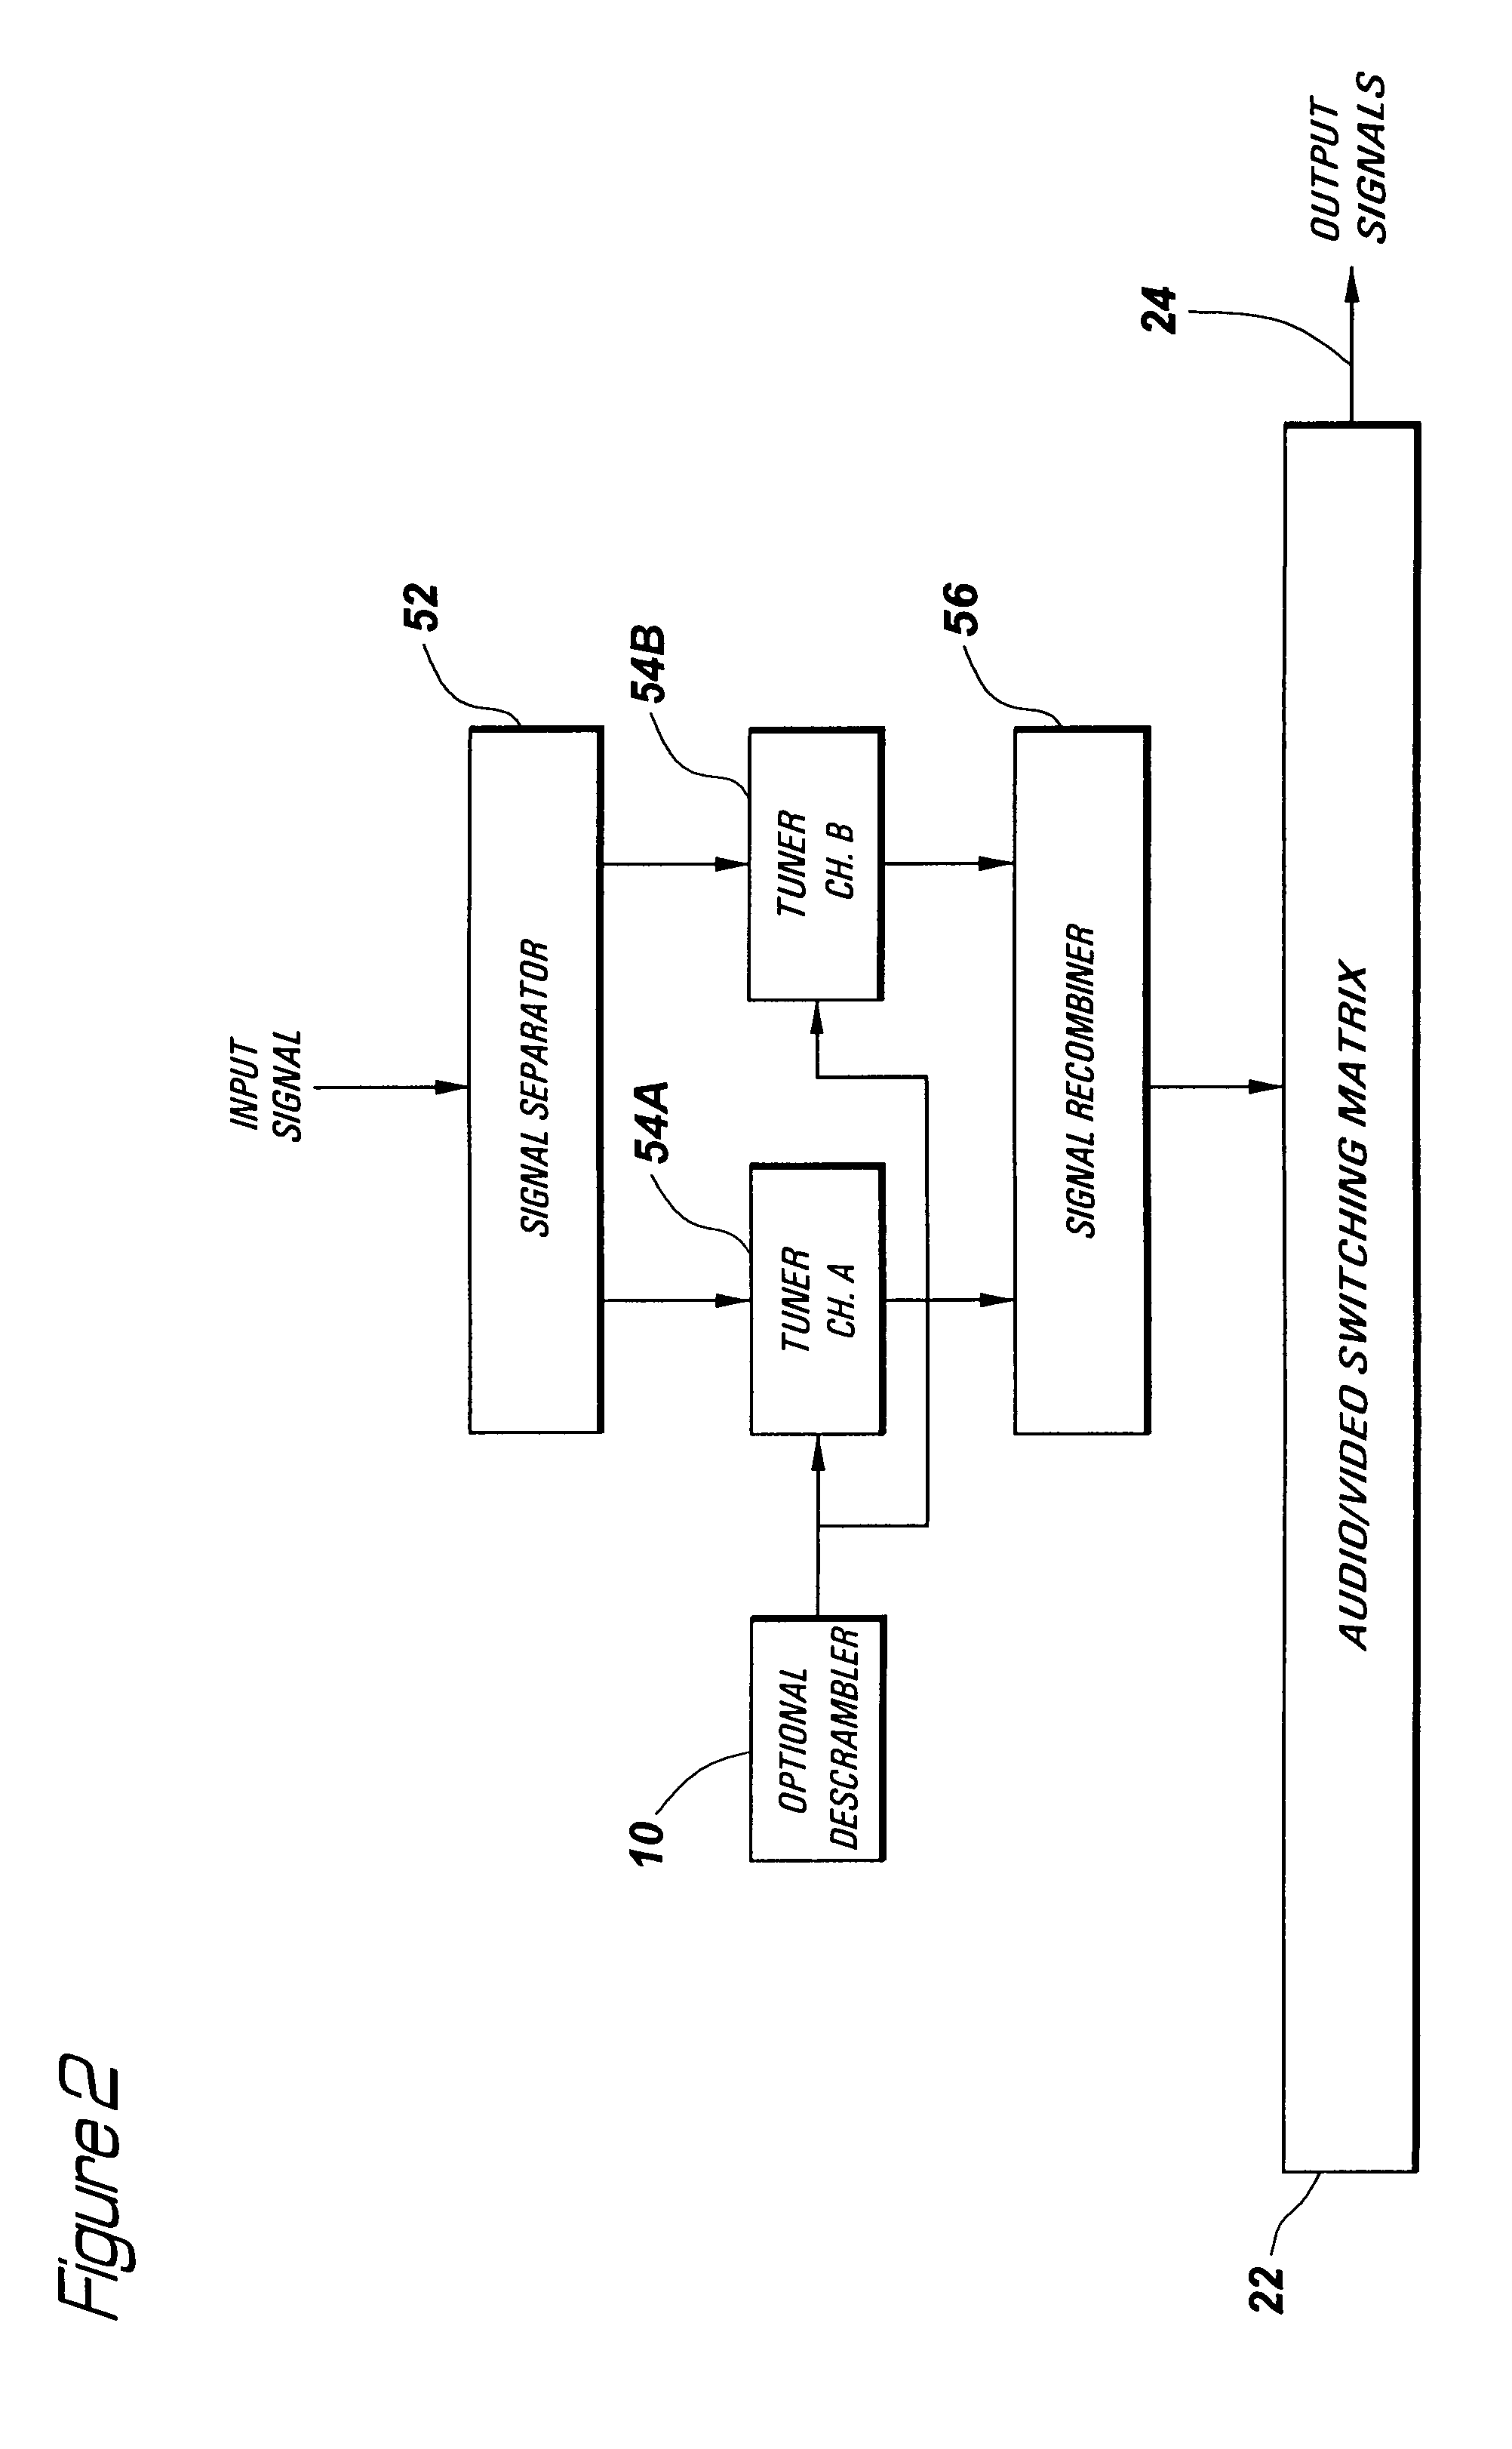 Video input switching and signal processing apparatus